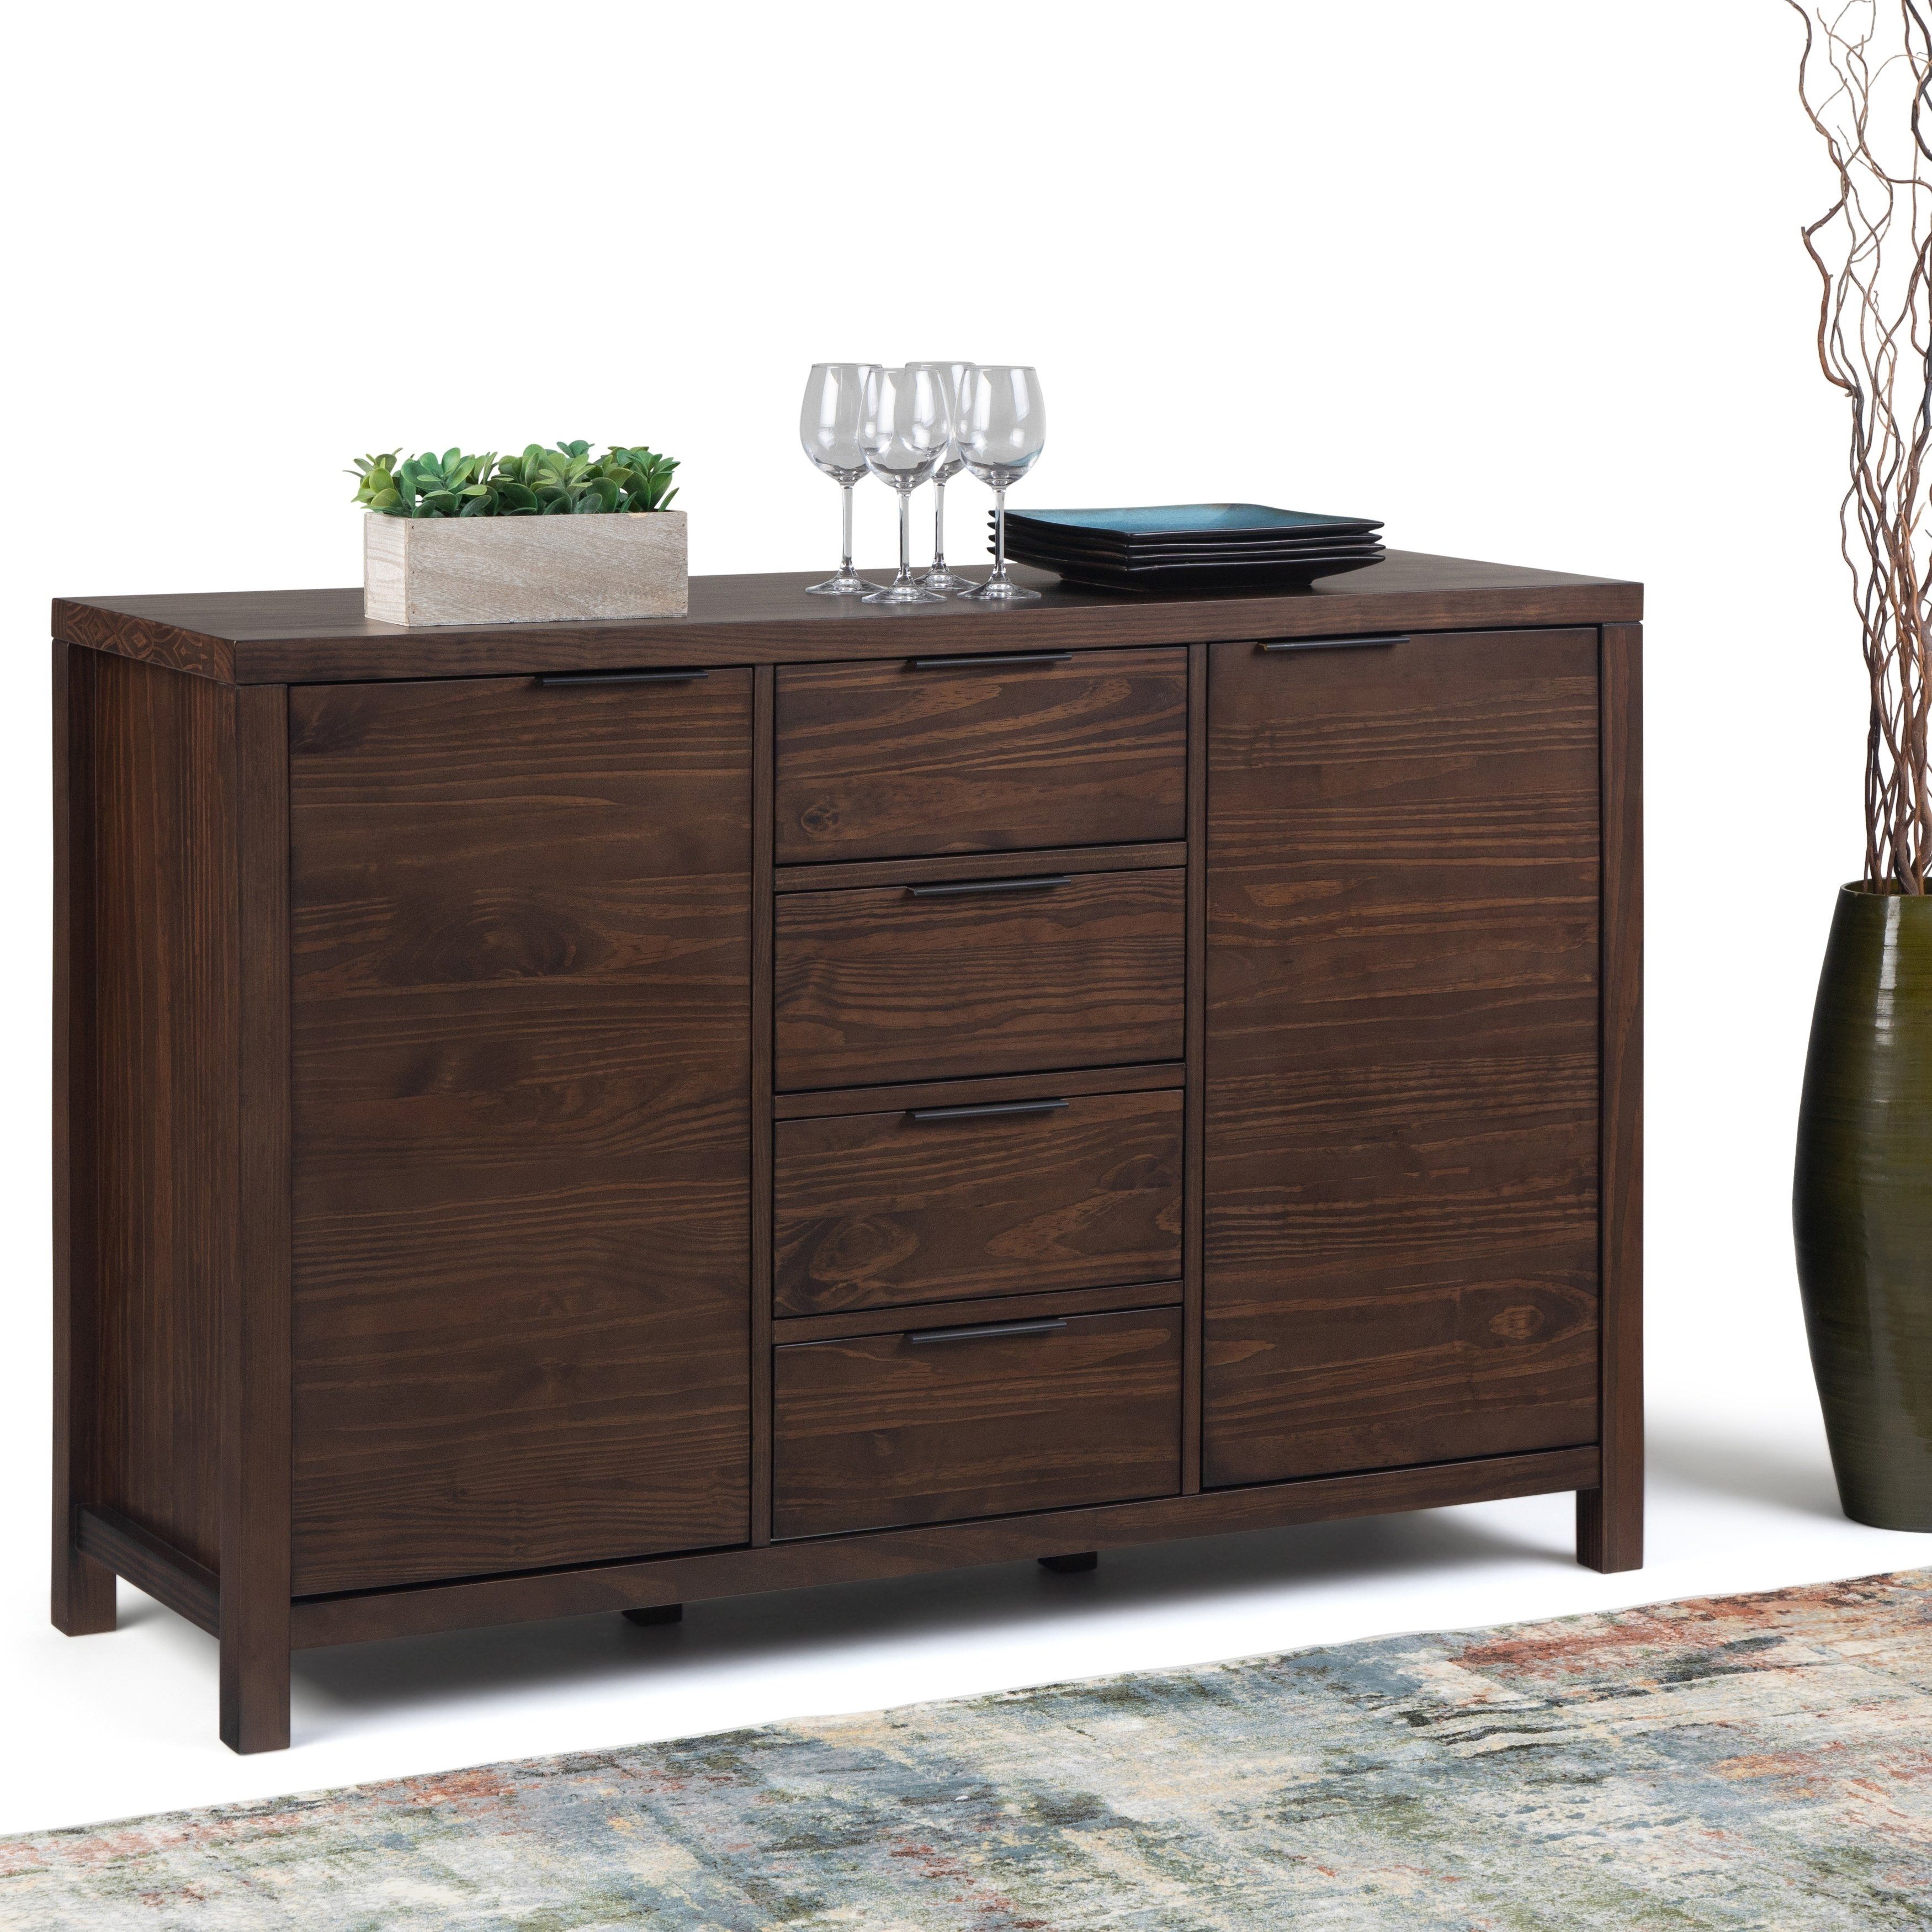 Wyndenhall Fabian Solid Wood 54 Inch Wide Modern Within Solid Wood Contemporary Sideboards Buffets (View 3 of 30)